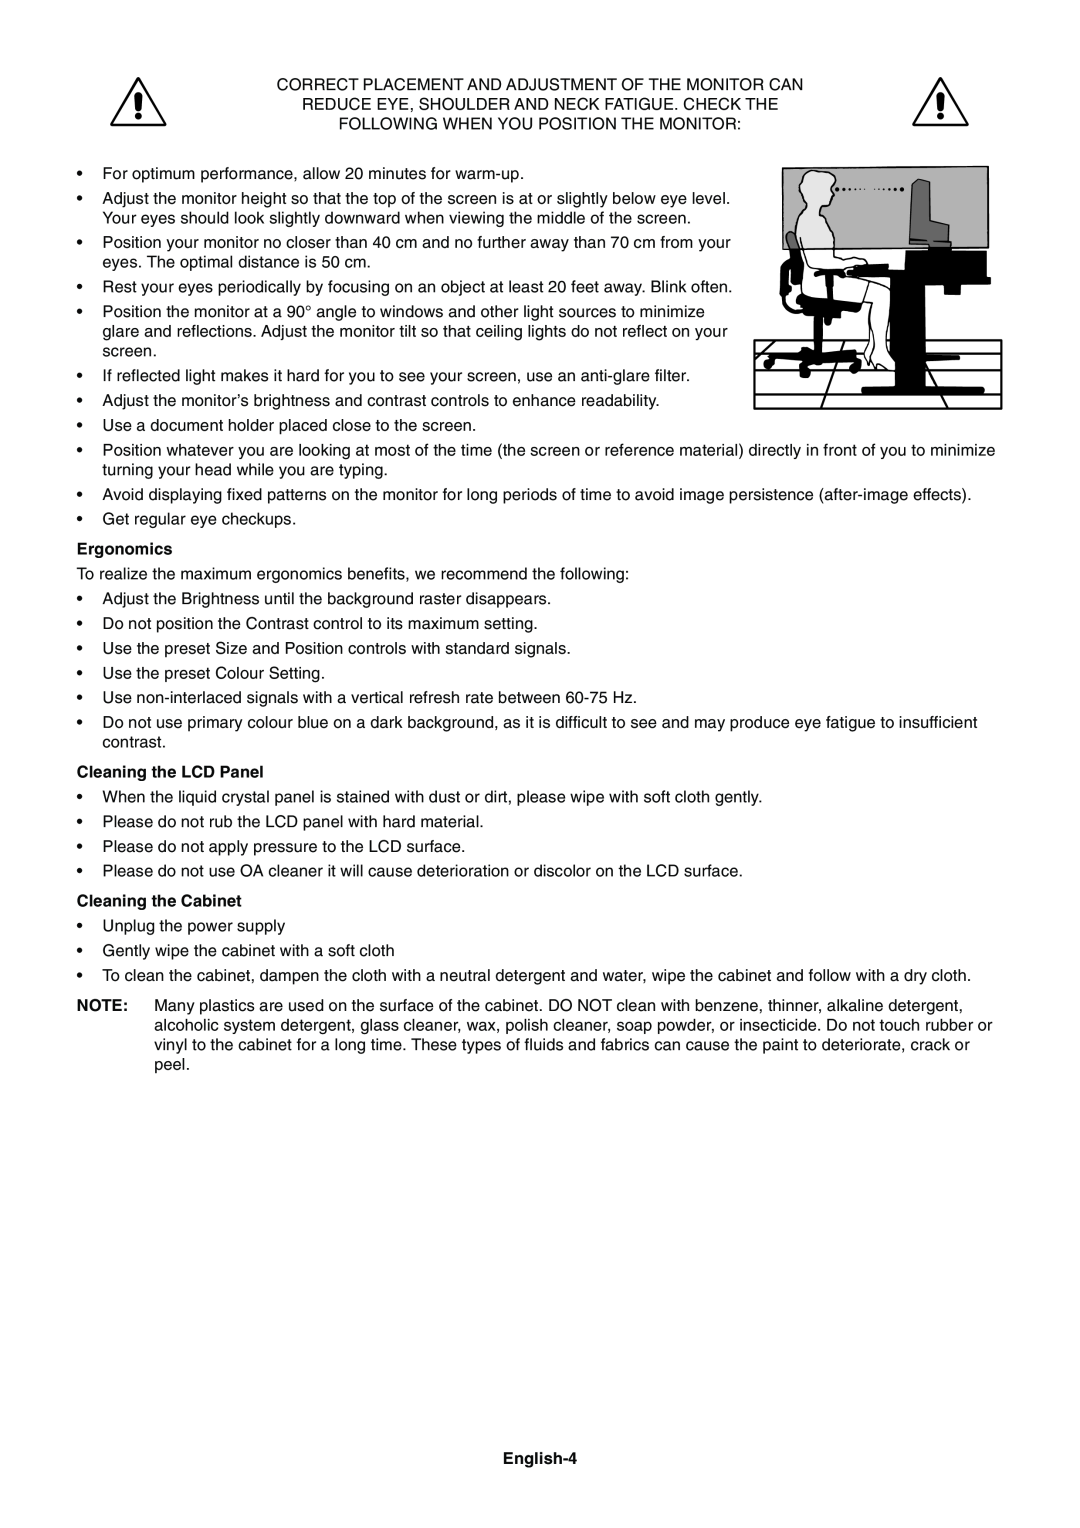 NEC E201W user manual Ergonomics, Cleaning the LCD Panel, Cleaning the Cabinet, English-4 